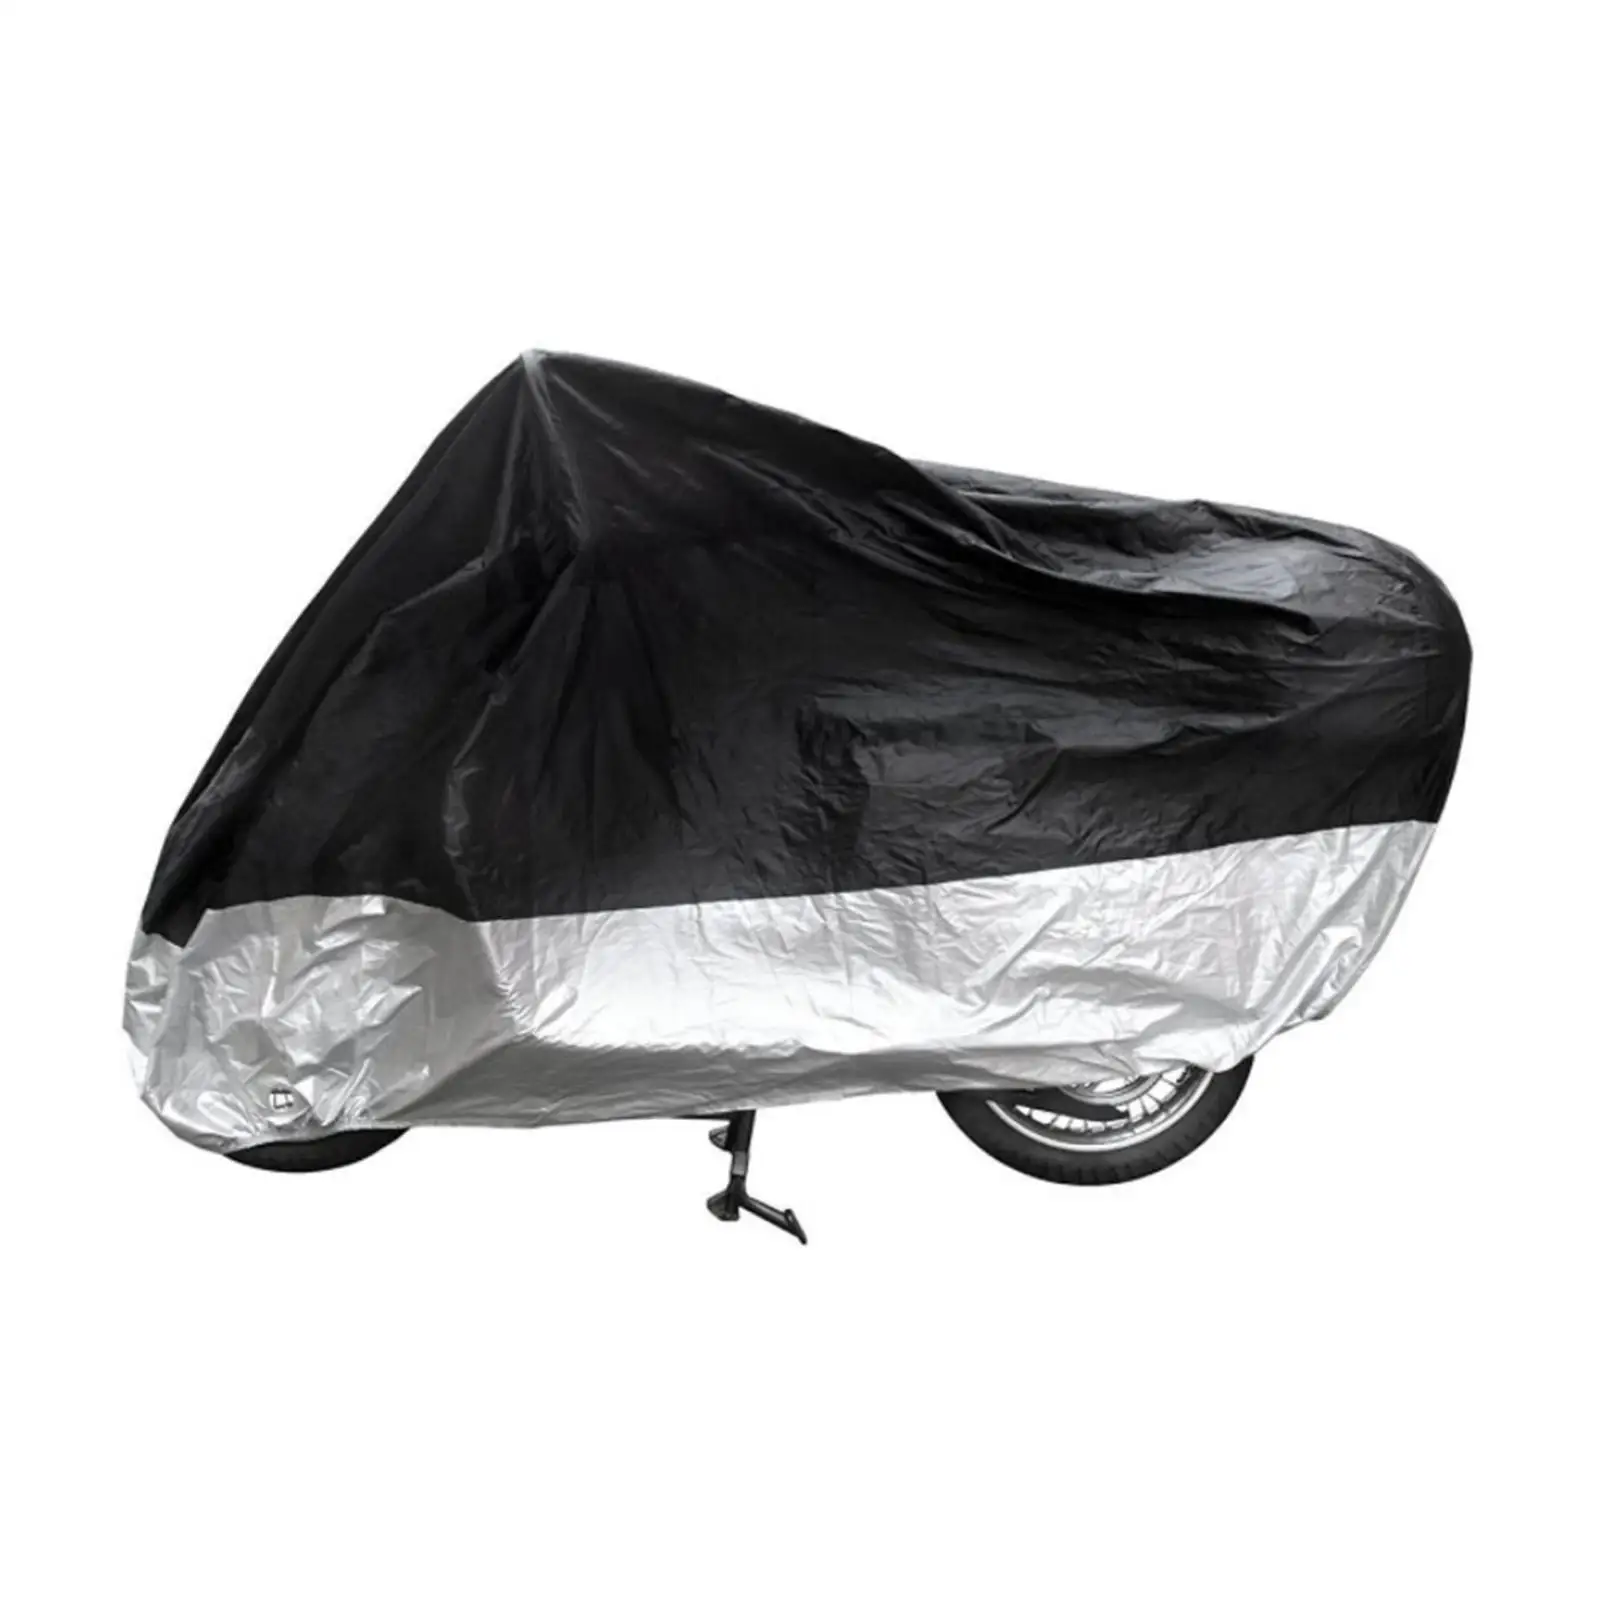 Motorcycle Cover Lightweight 109T Polyester Taffeta PU with Reserved Lock Hole Premium Motorbike Dust  for Large Motorcycles